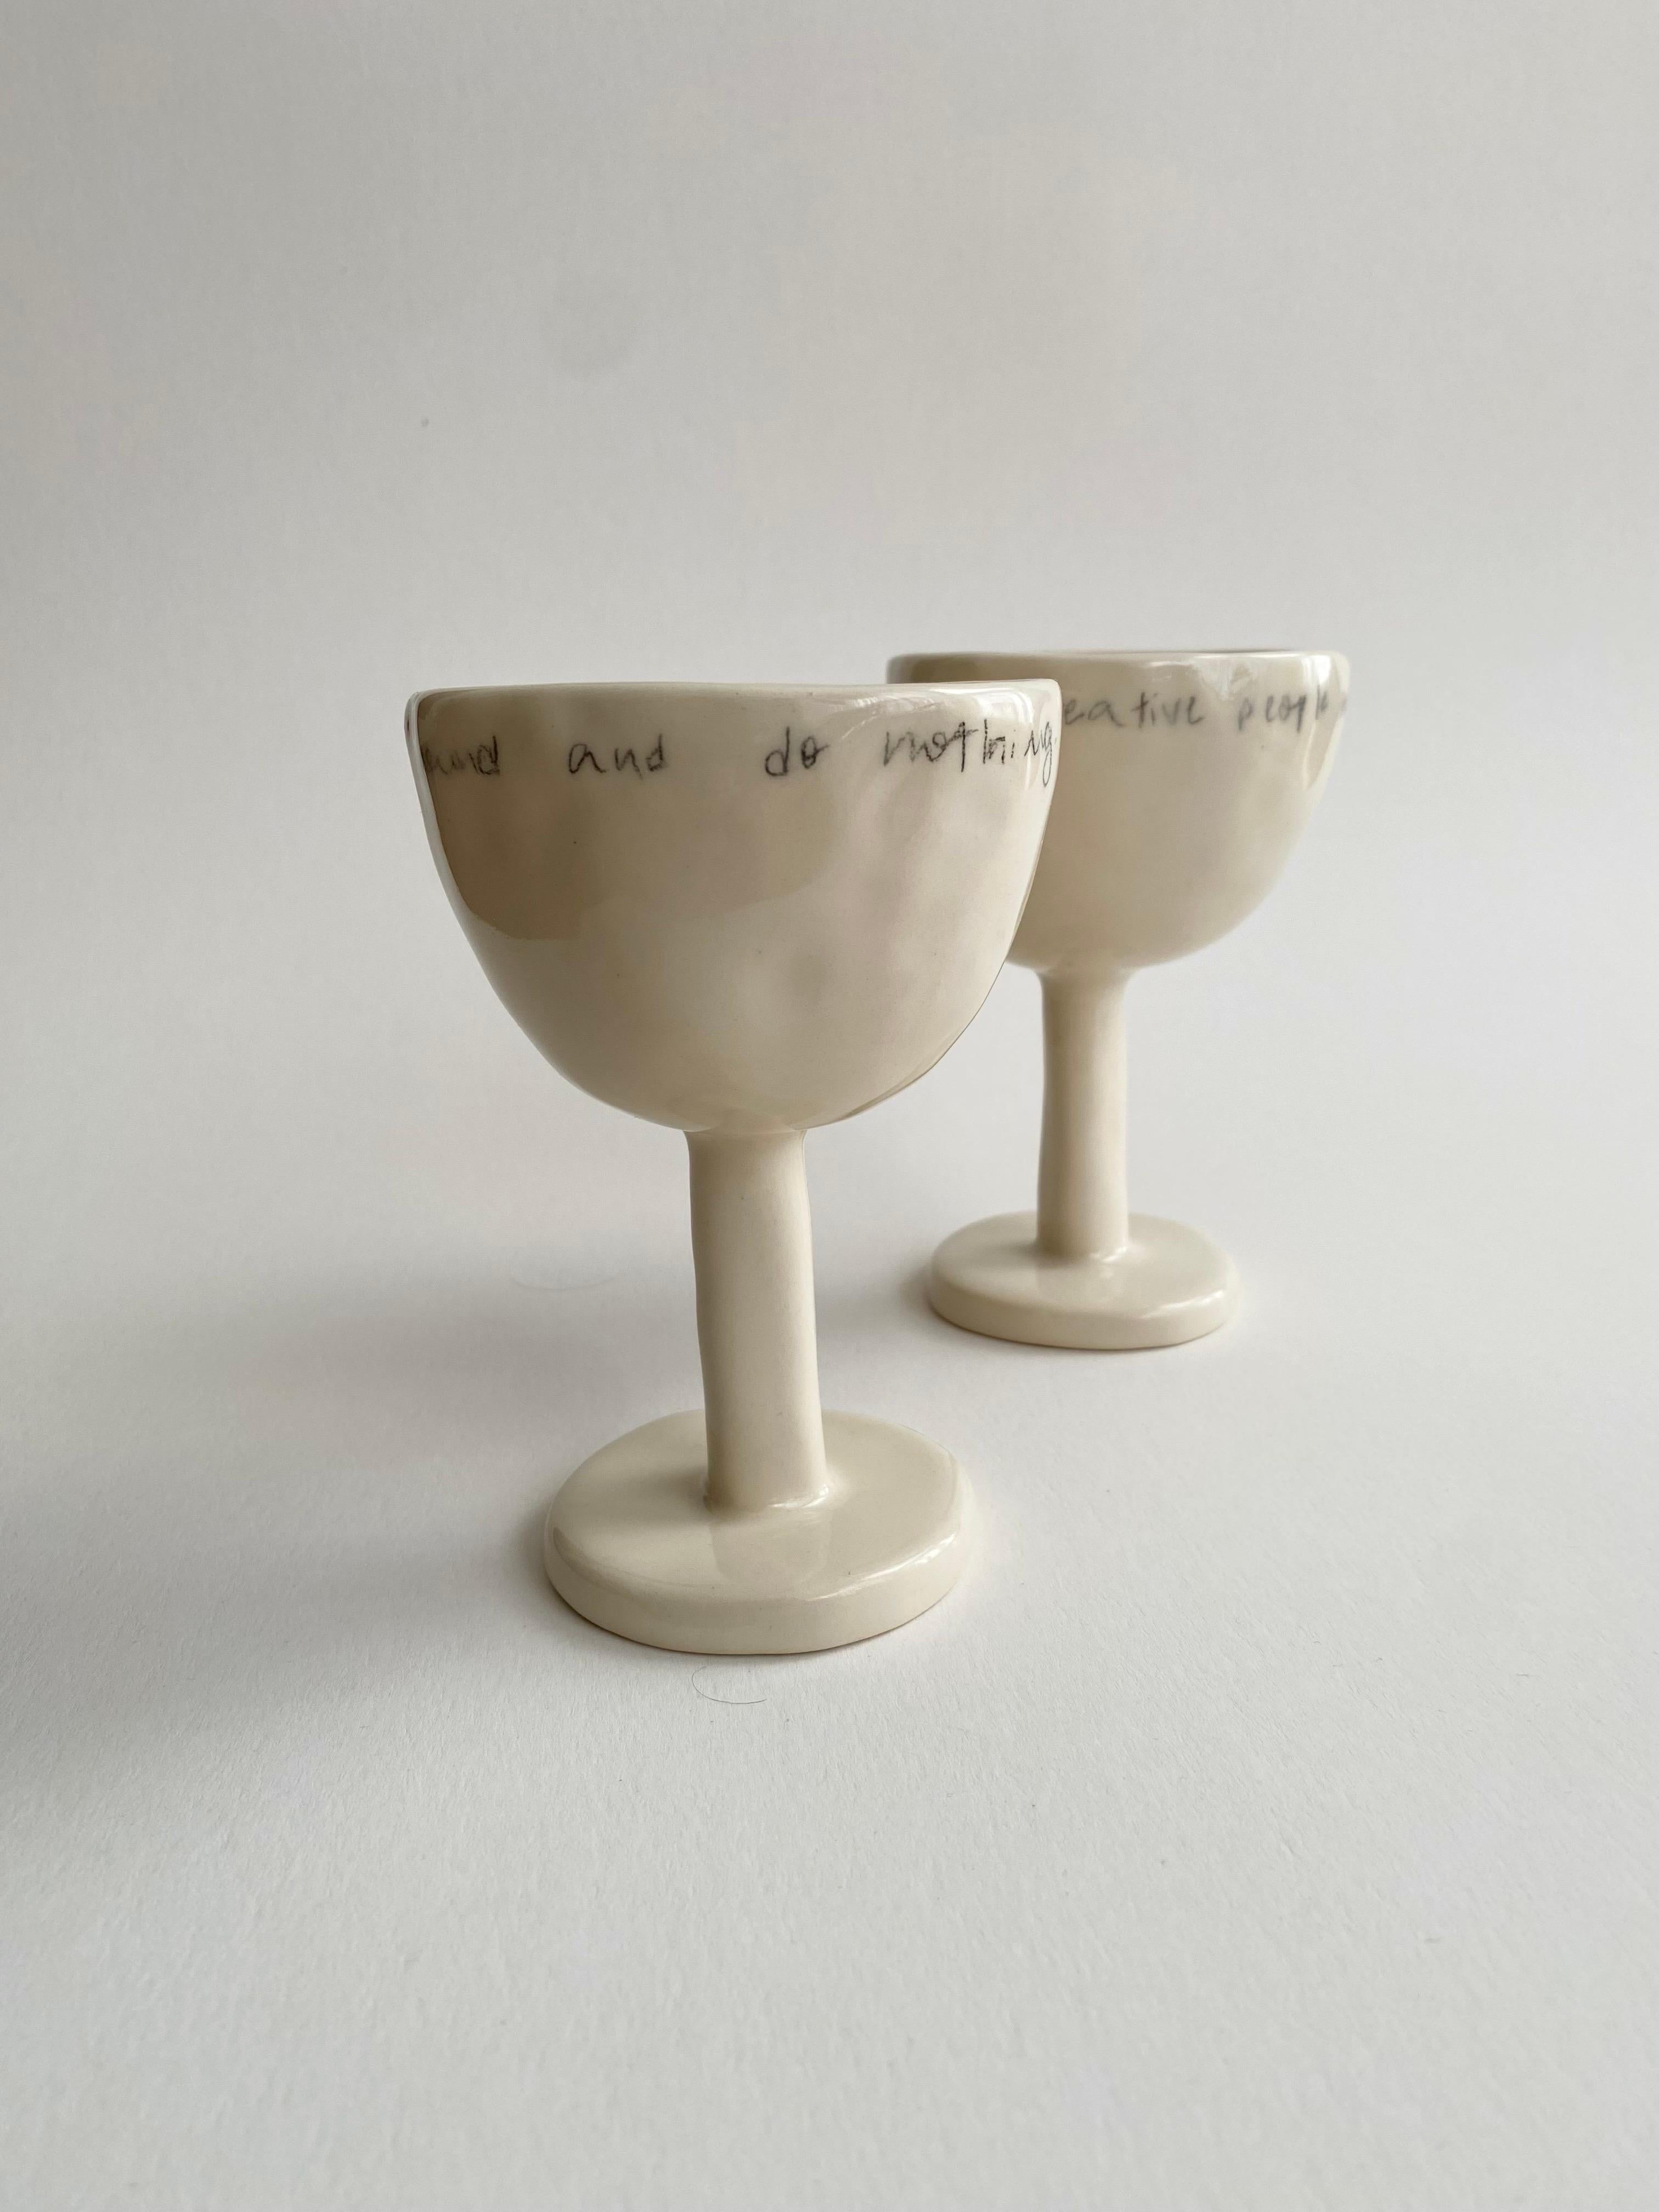 Hand-Crafted Glossy Modern Ceramic Wine Cup – Organic Minimalist Handcrafted Handwritten For Sale